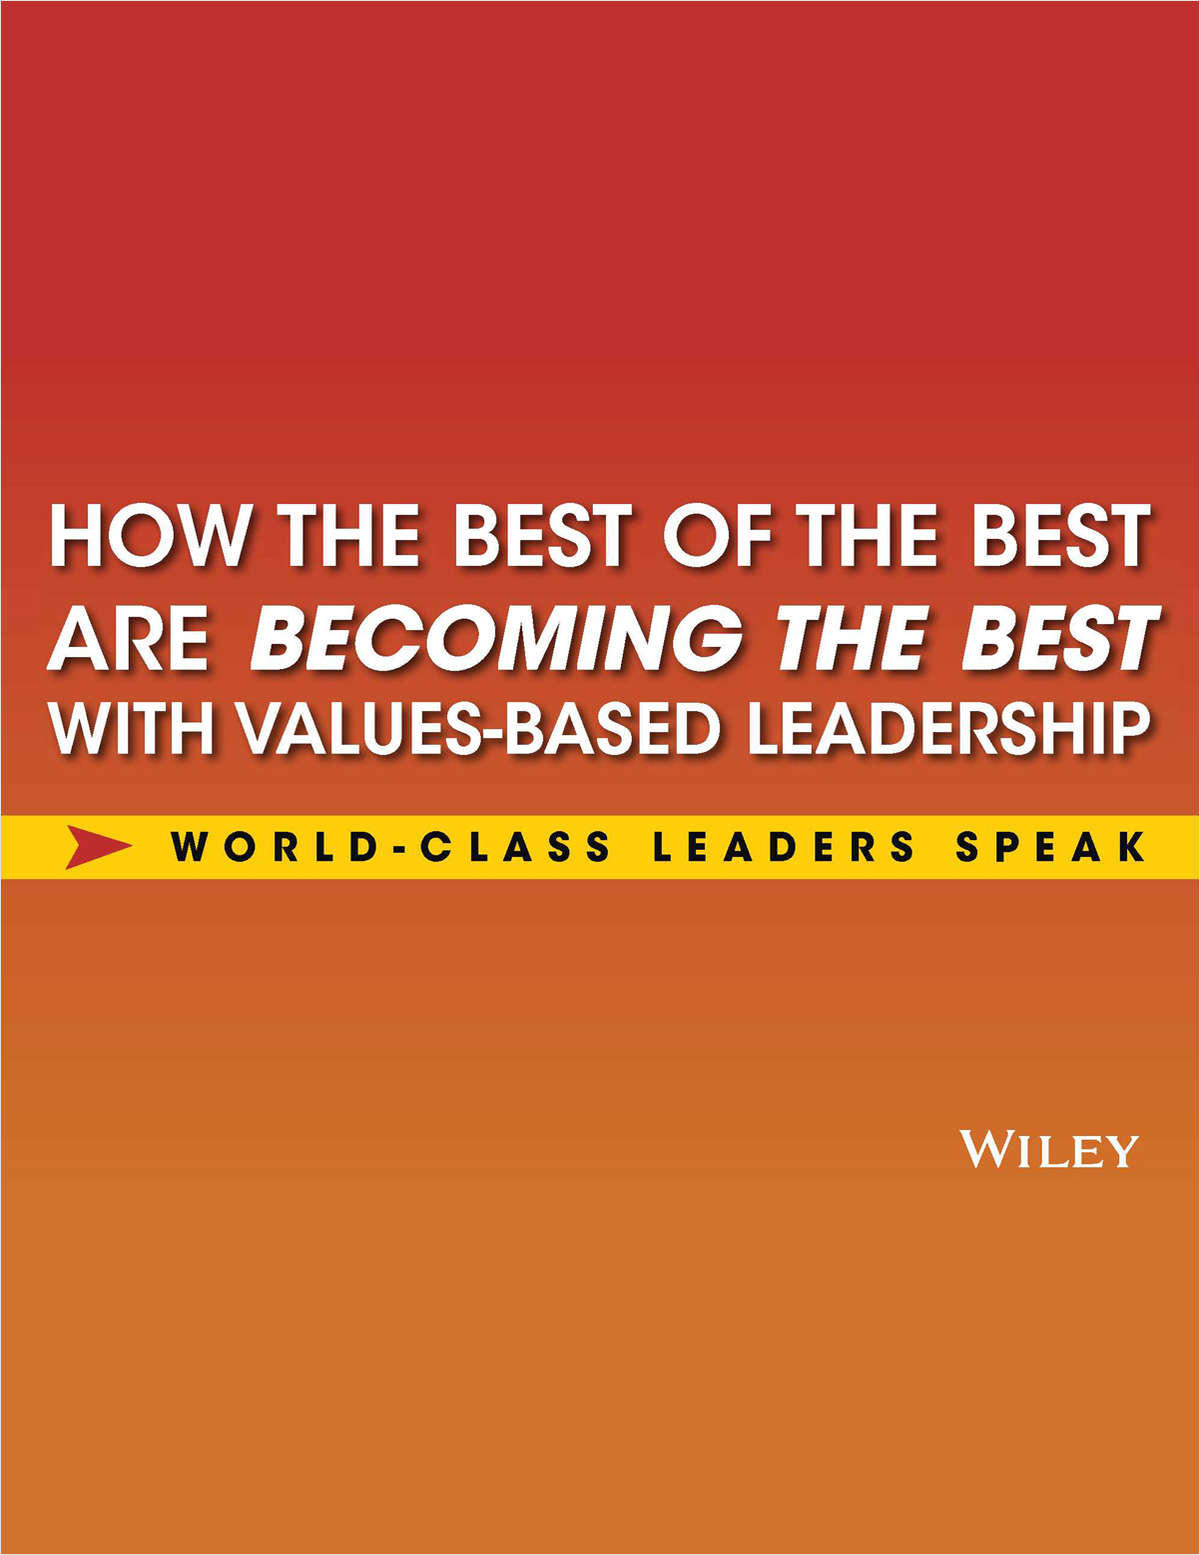 The Best of the Best in Values-Based Leadership